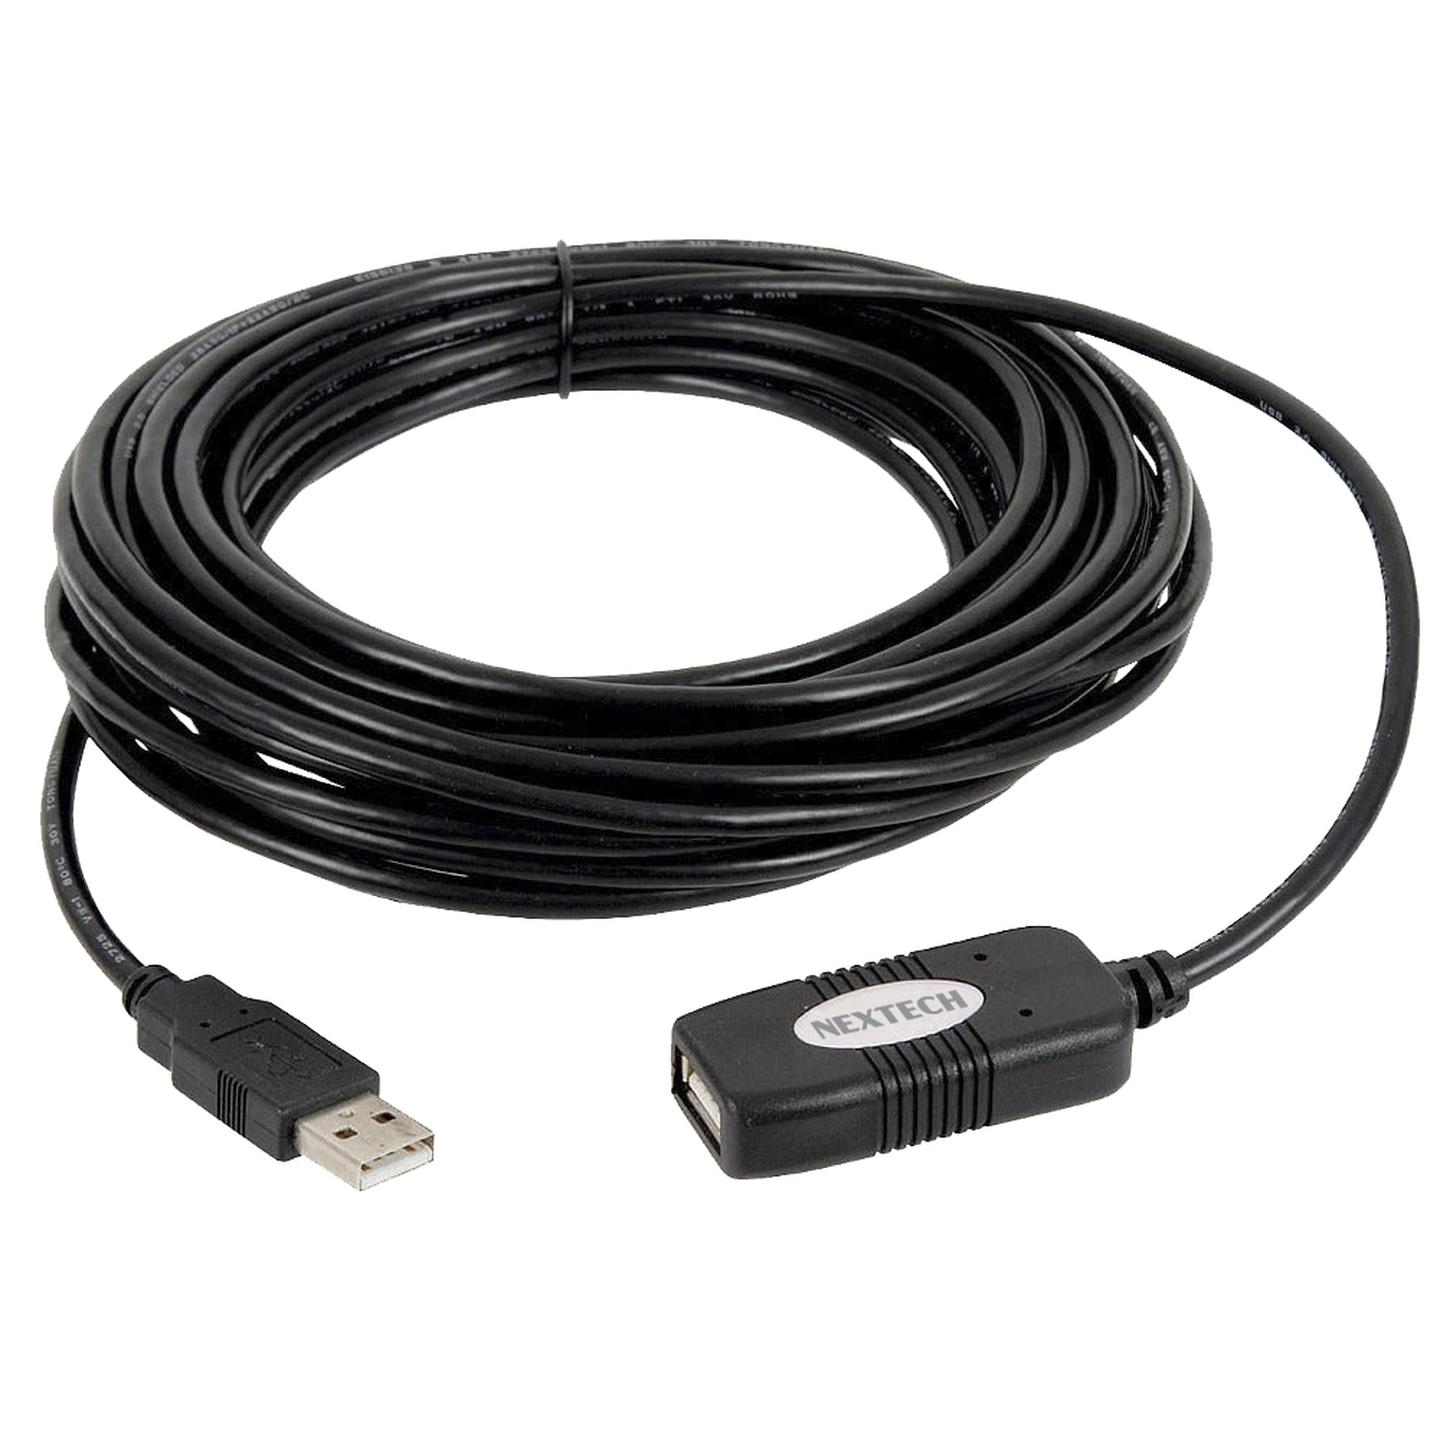 Powered USB 2.0 Extension Cable 20m